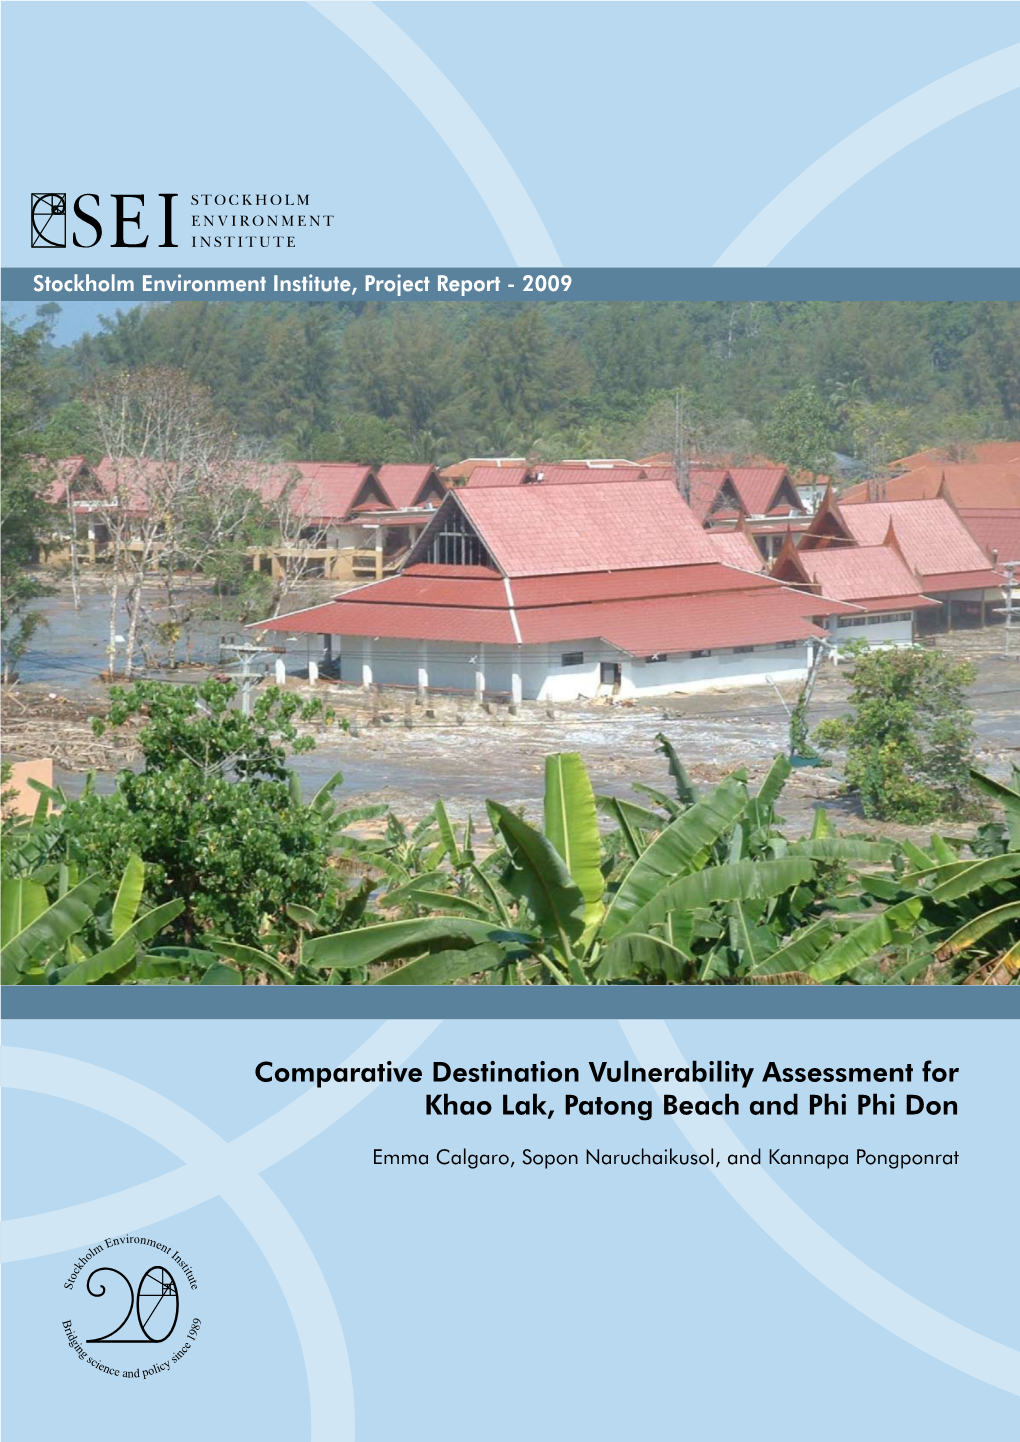 Comparative Destination Vulnerability Assessment for Khao Lak, Patong Beach and Phi Phi Don